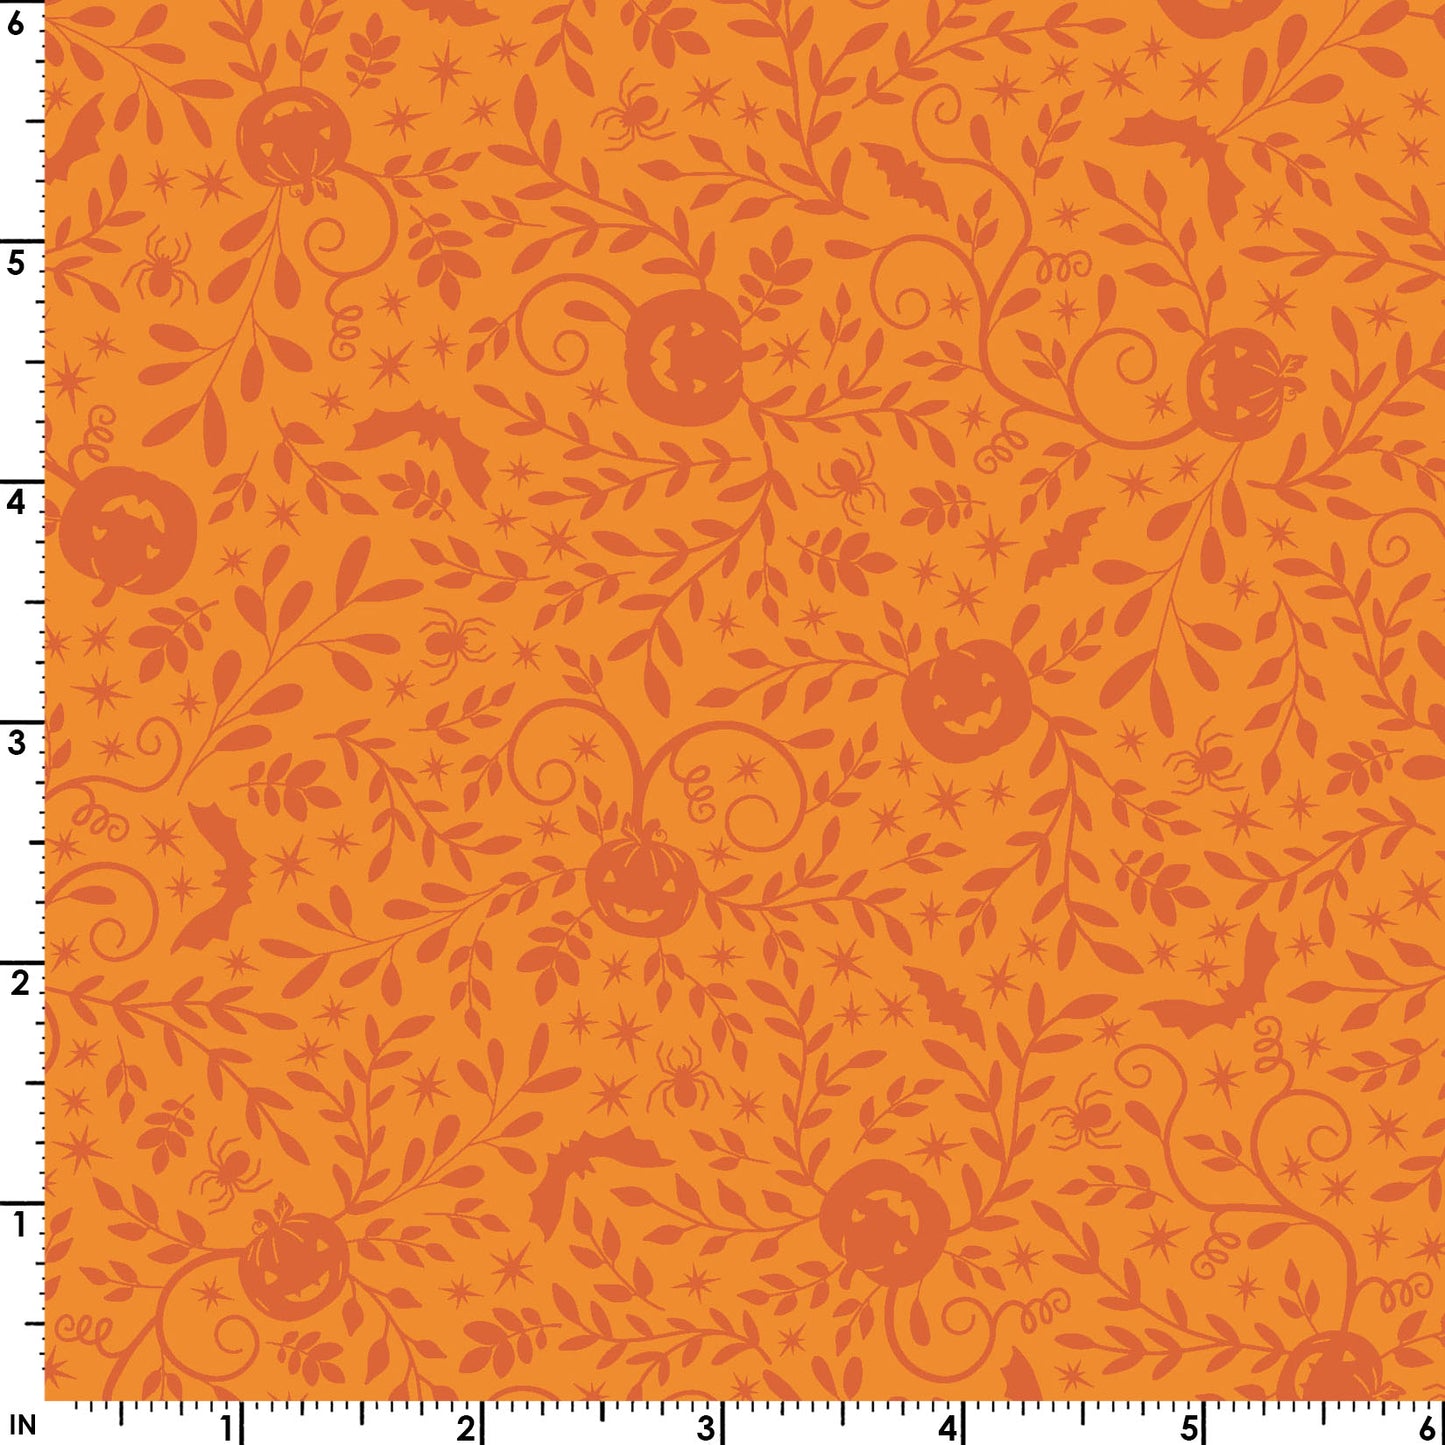 The Pumpkin Vines in orange (MAS10572-O) print from the Pumpkin and Potions line by Kimberbell for Maywood Studio features tone on tone pumpkins, bats, and more. Photo shows details of the designs with a ruler to show the scale.